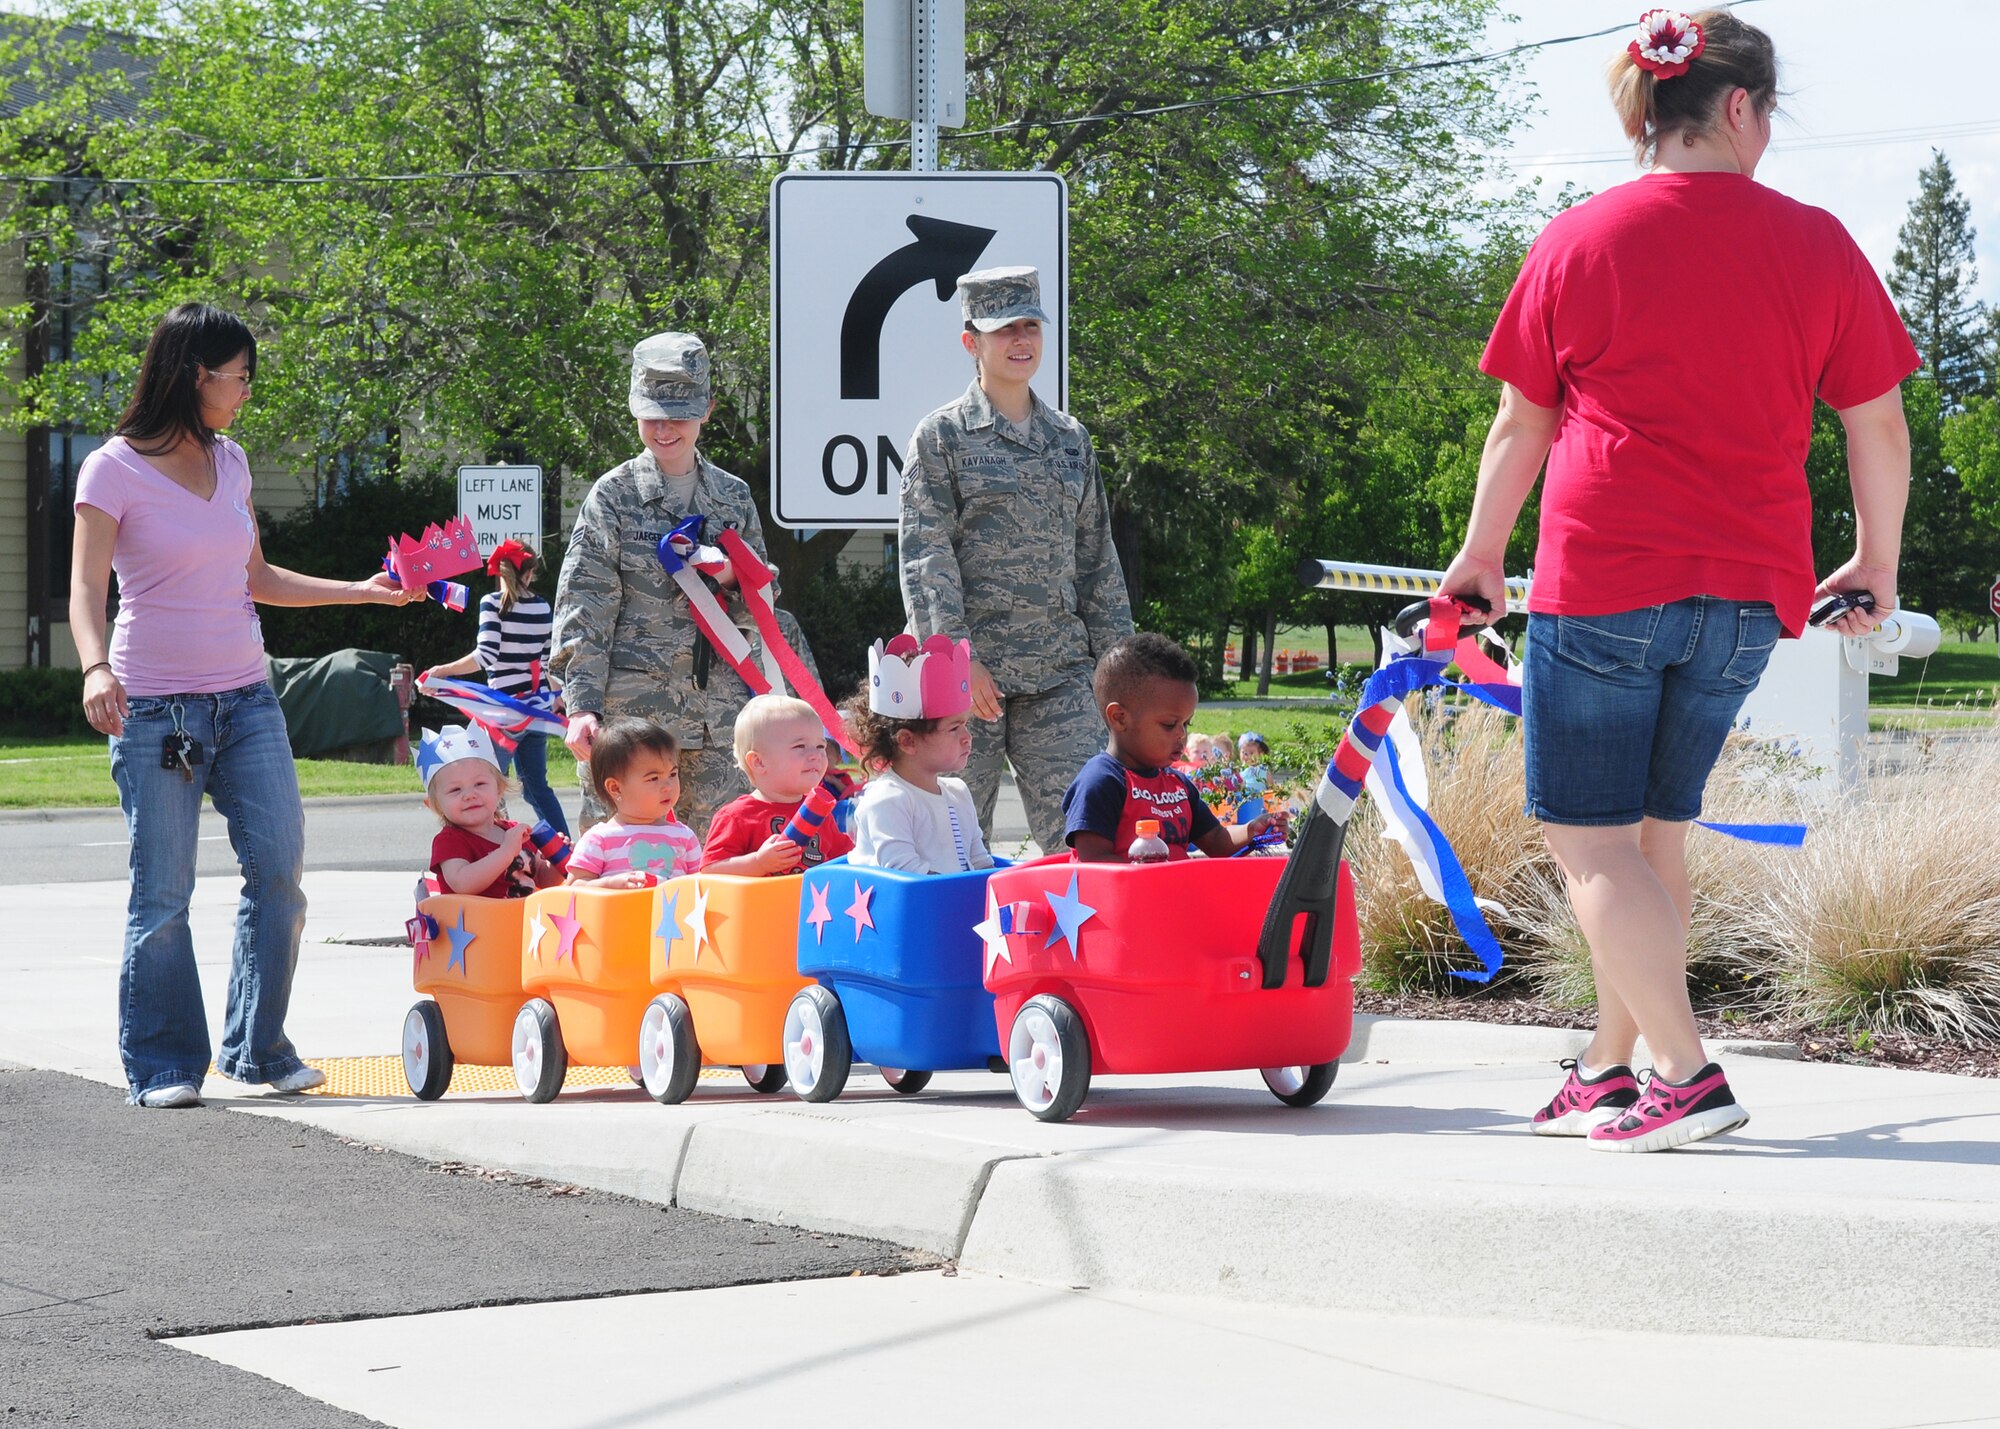 Staff and children of the Child Development Center participate in a parade celebrating the month of the military child at Beale Air Force Base Calif., April 5, 2013. Parents joined and supported their children as the paraded around the CDC in celebration. (U.S. Air Force photo by Senior Airman Allen Pollard/Released)